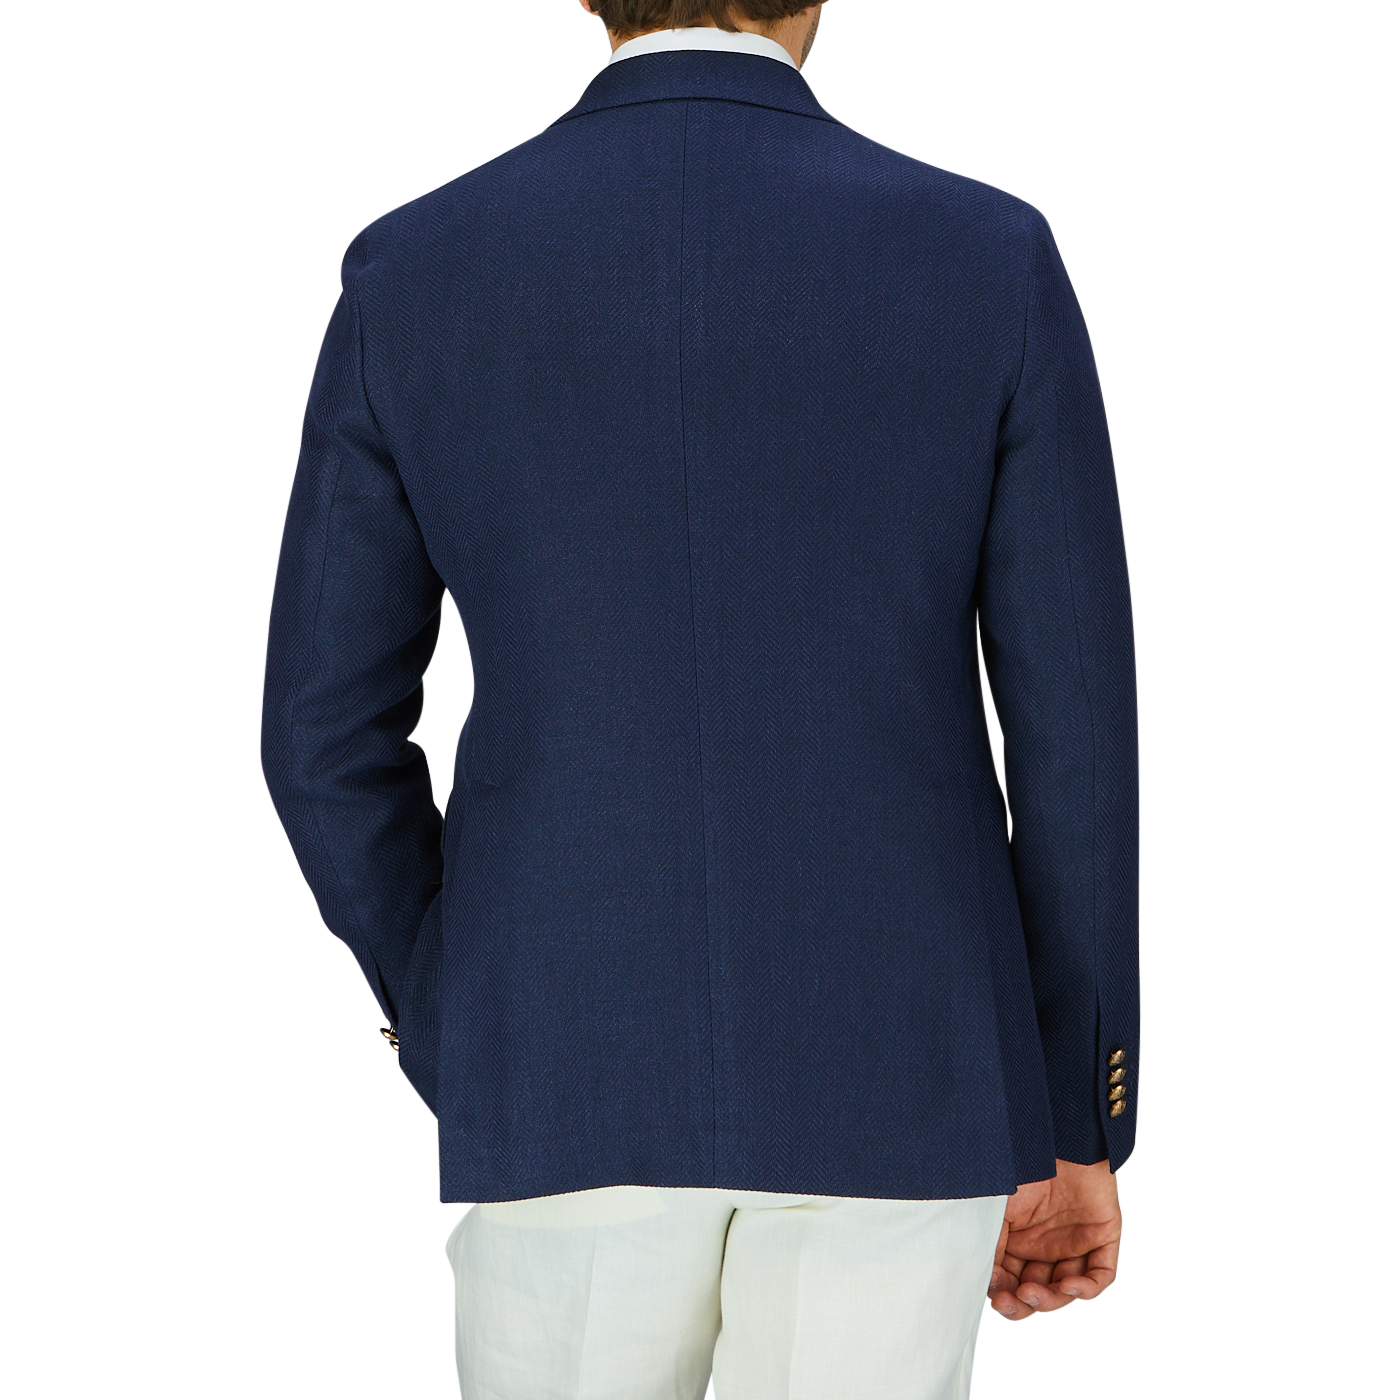 A person from behind wearing a Tagliatore navy blue herringbone cotton linen Vesuvio blazer with peak lapel and white trousers.